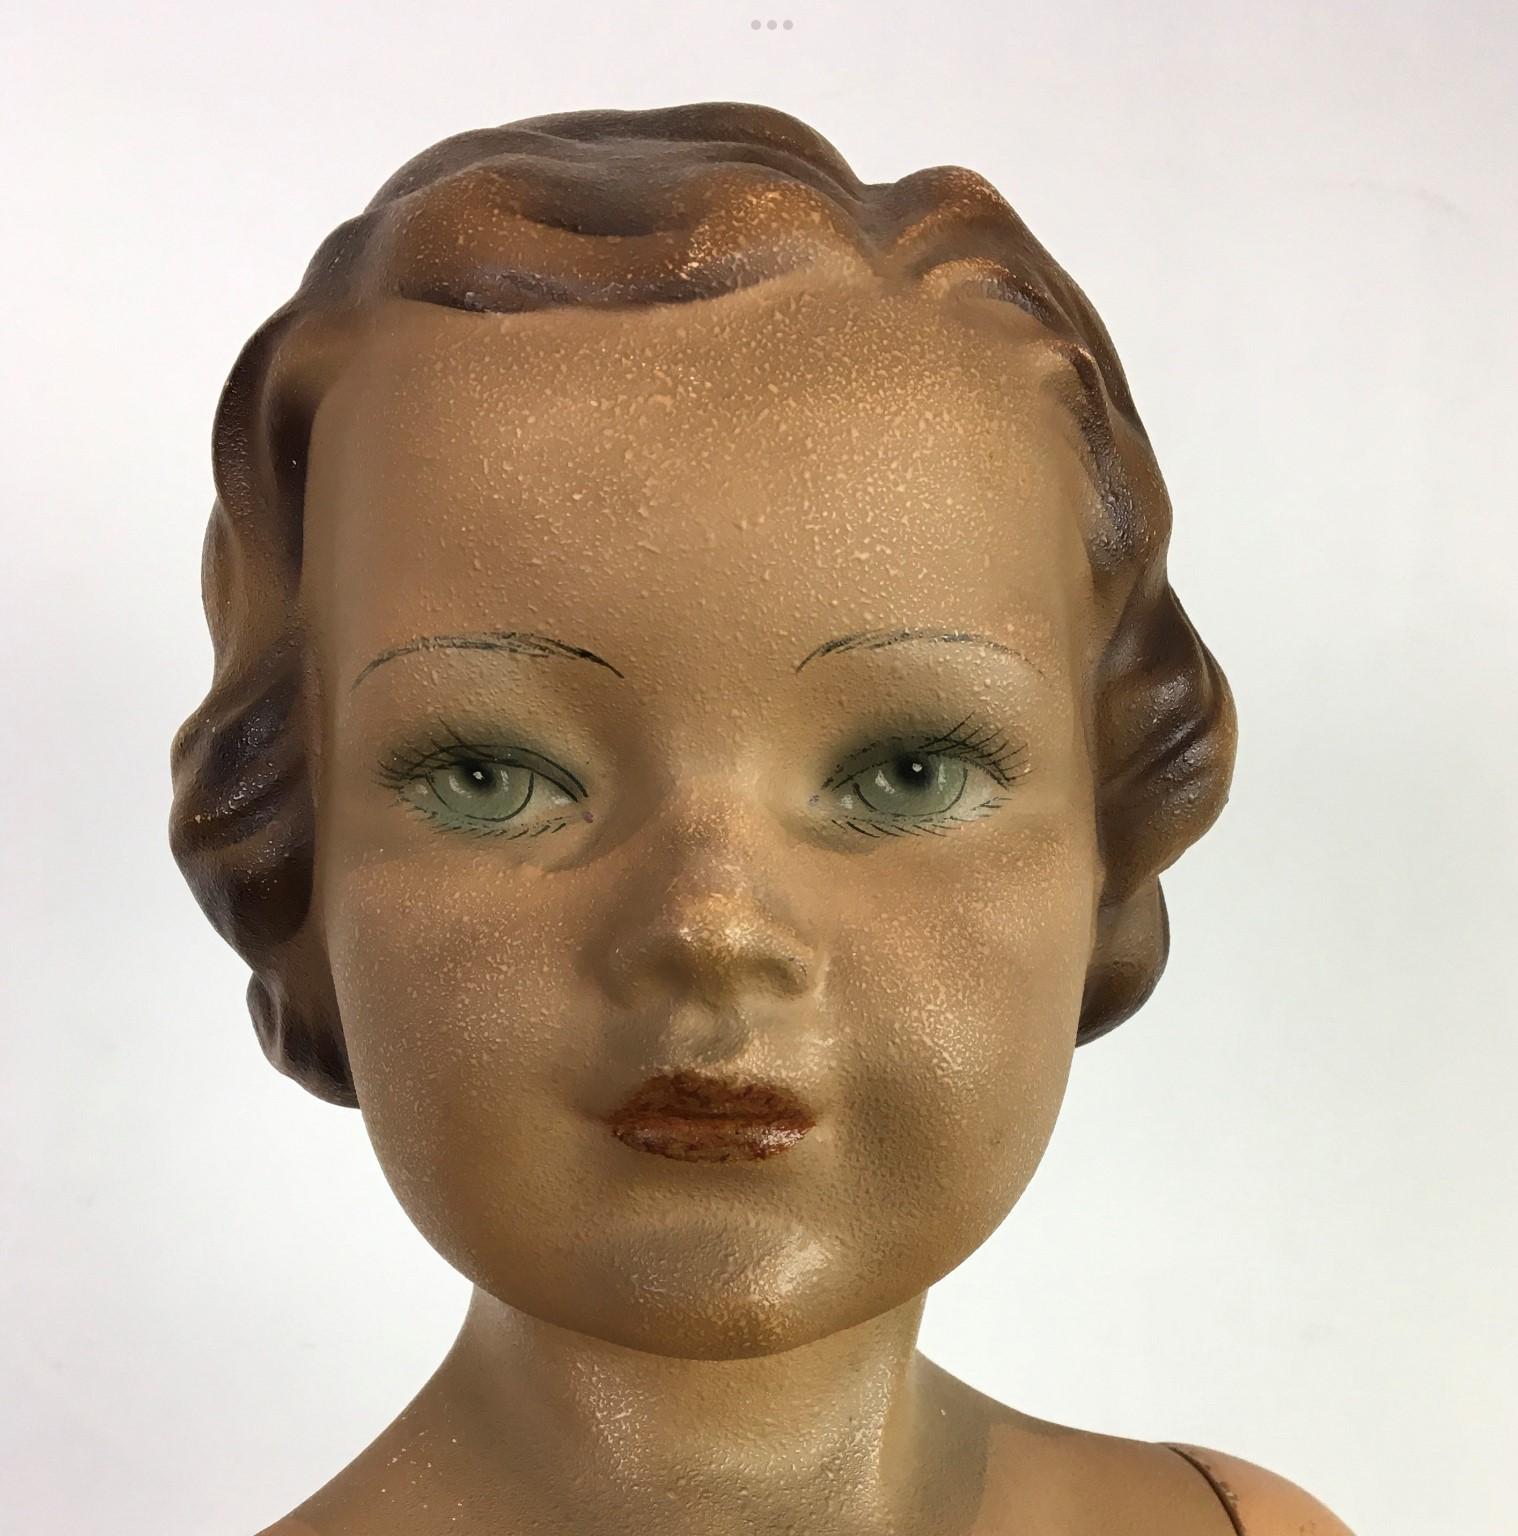 Art Deco store display doll - child mannequin doll.
This antique child mannequin is a girl. 
She has a painted plaster body, painted eyes and a painted wooden base. This store display advertising doll is probably designed for a clothing line which